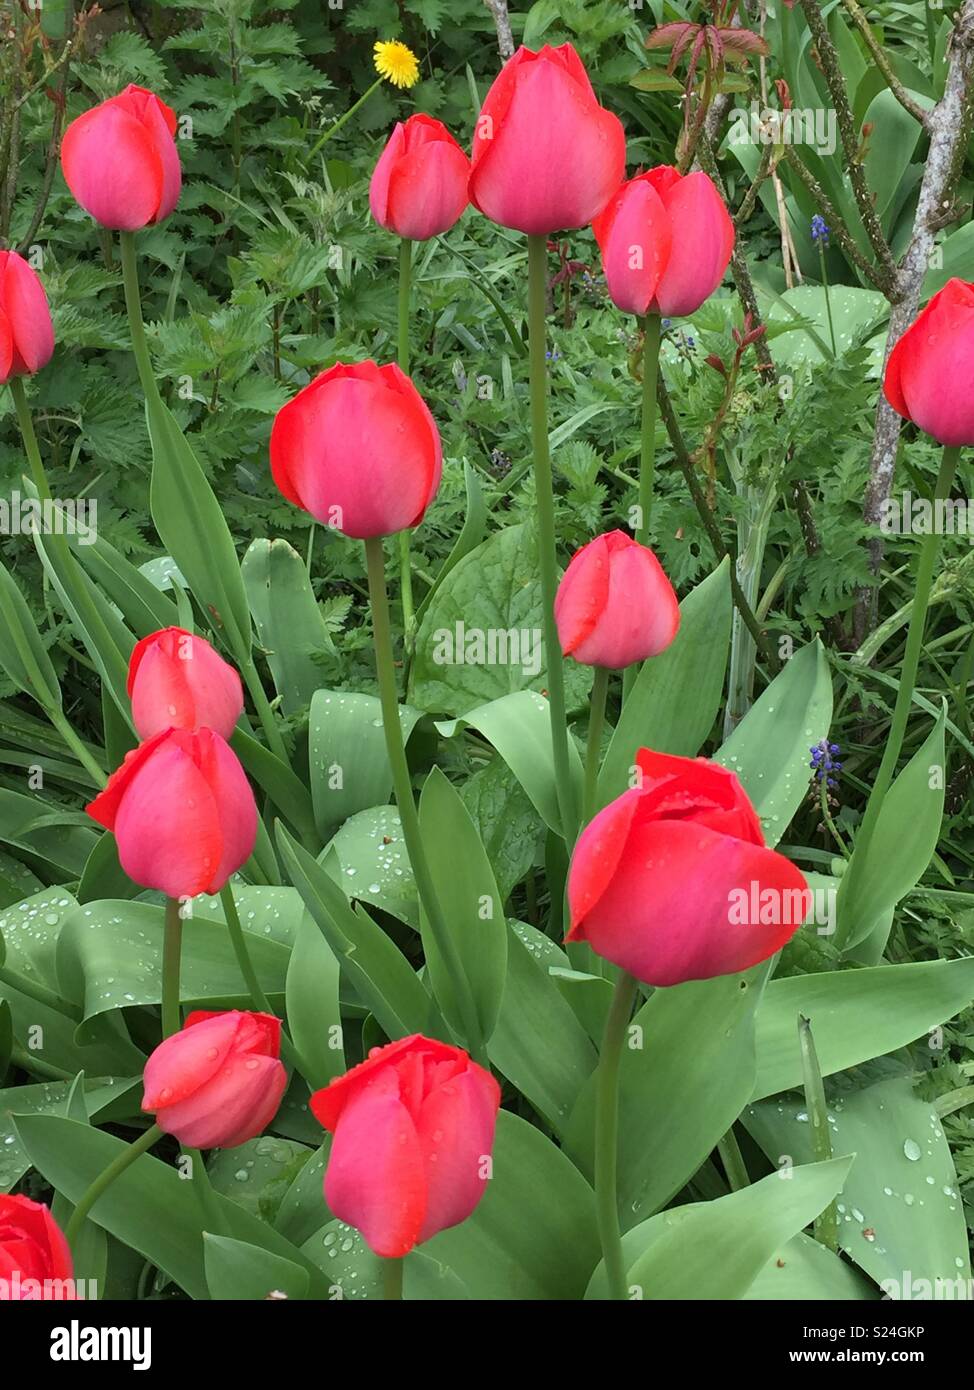 A flower bed of neon pink tulips against green leaves and foliage Stock Photo